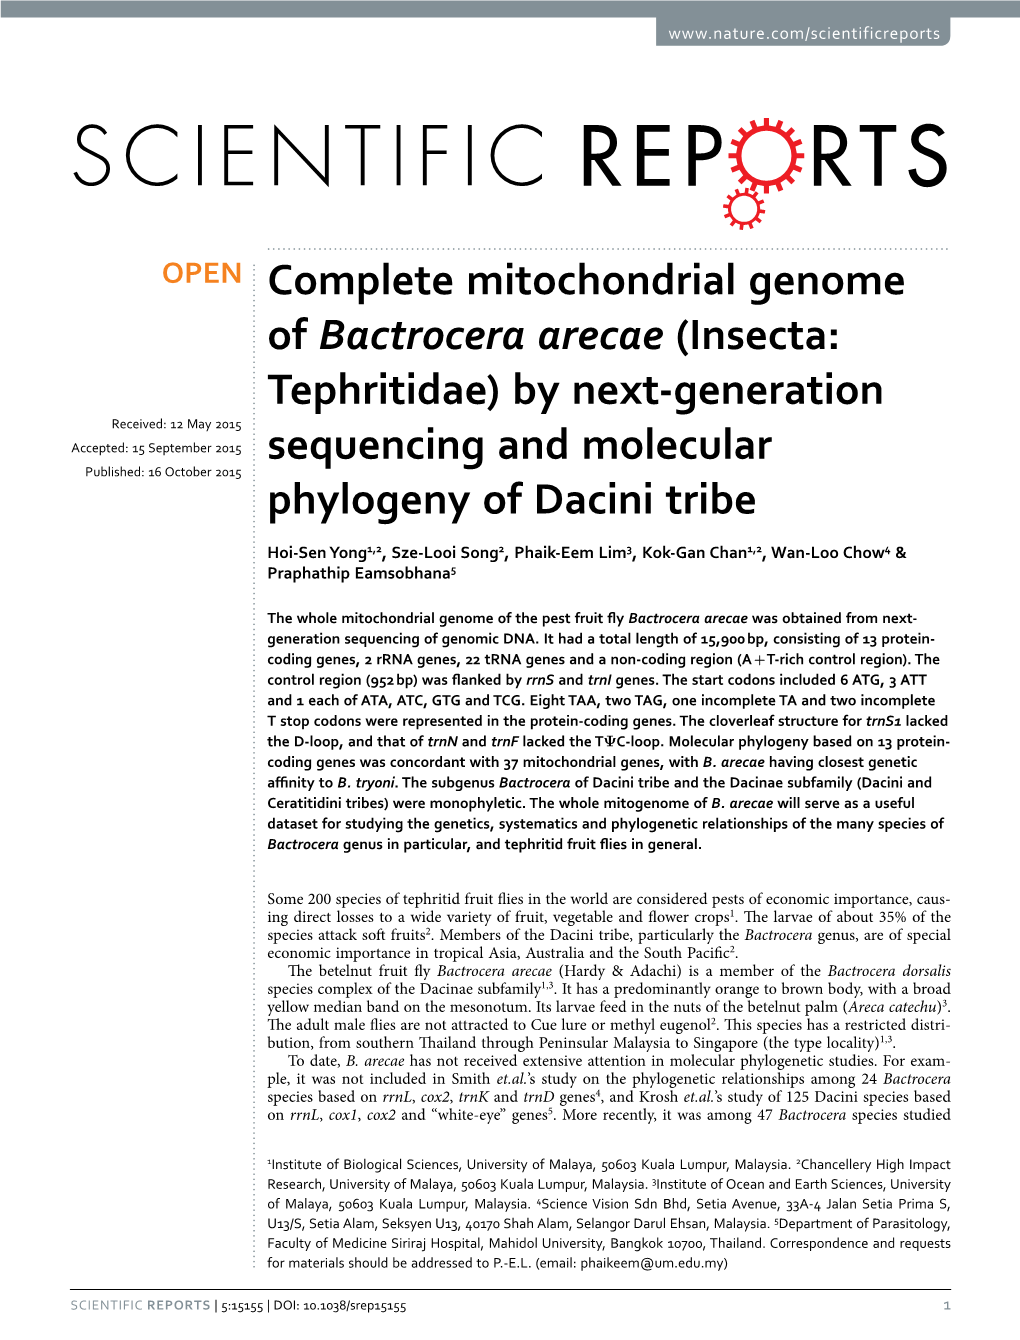 Complete Mitochondrial Genome of Bactrocera Arecae